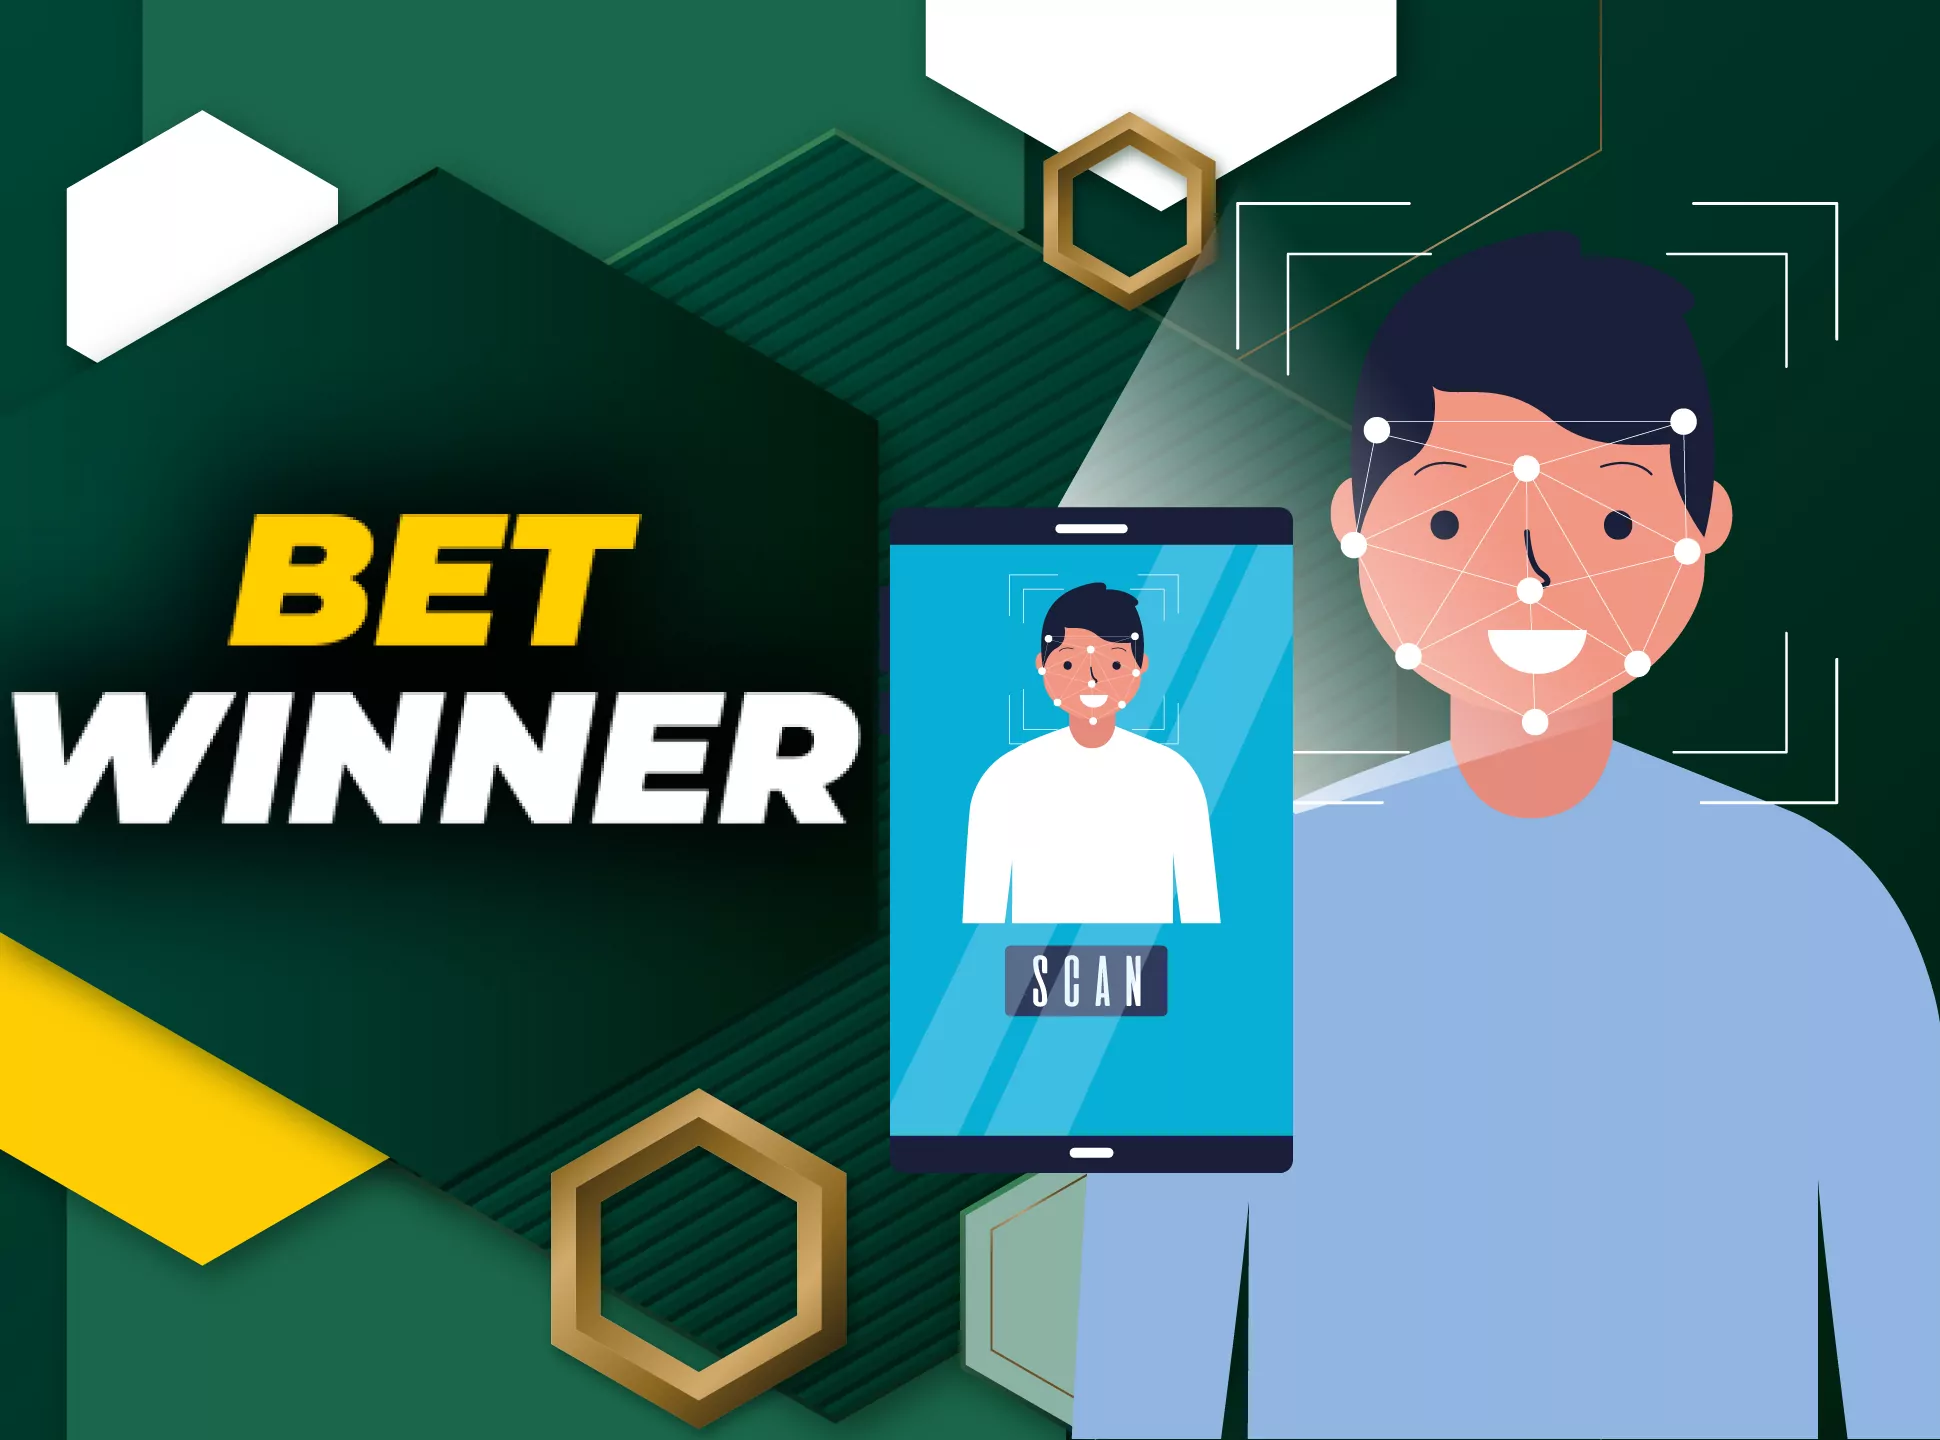 Verify your account if you want to withdraw money from Betwinner.